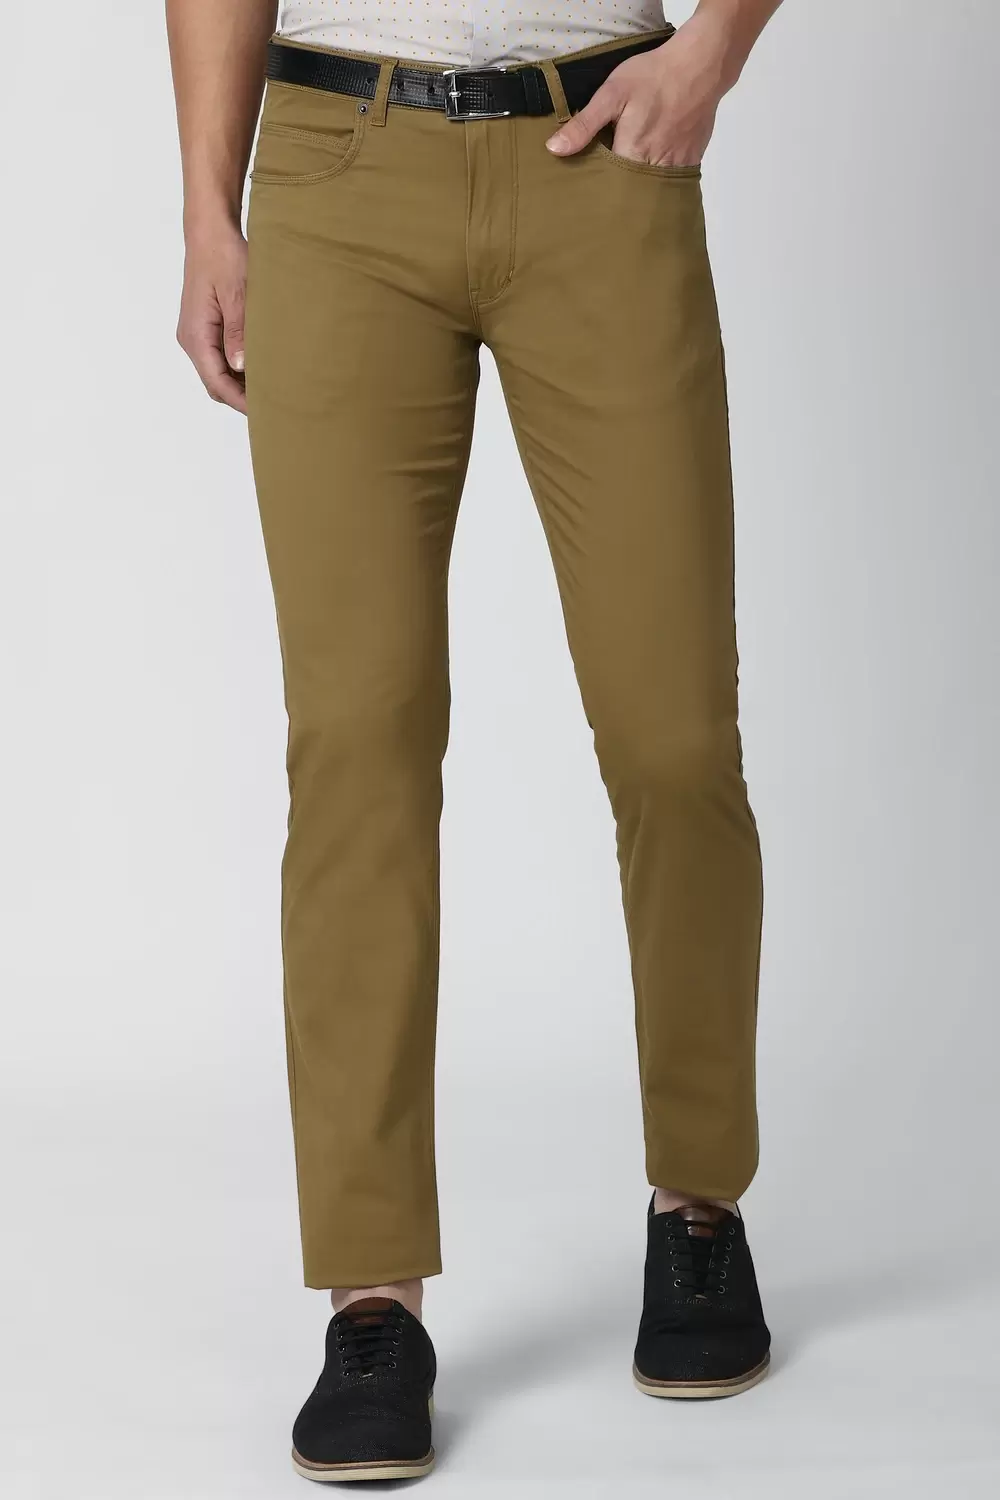 Peter England Men Brown Solid  Slim Fit Casual Trousers